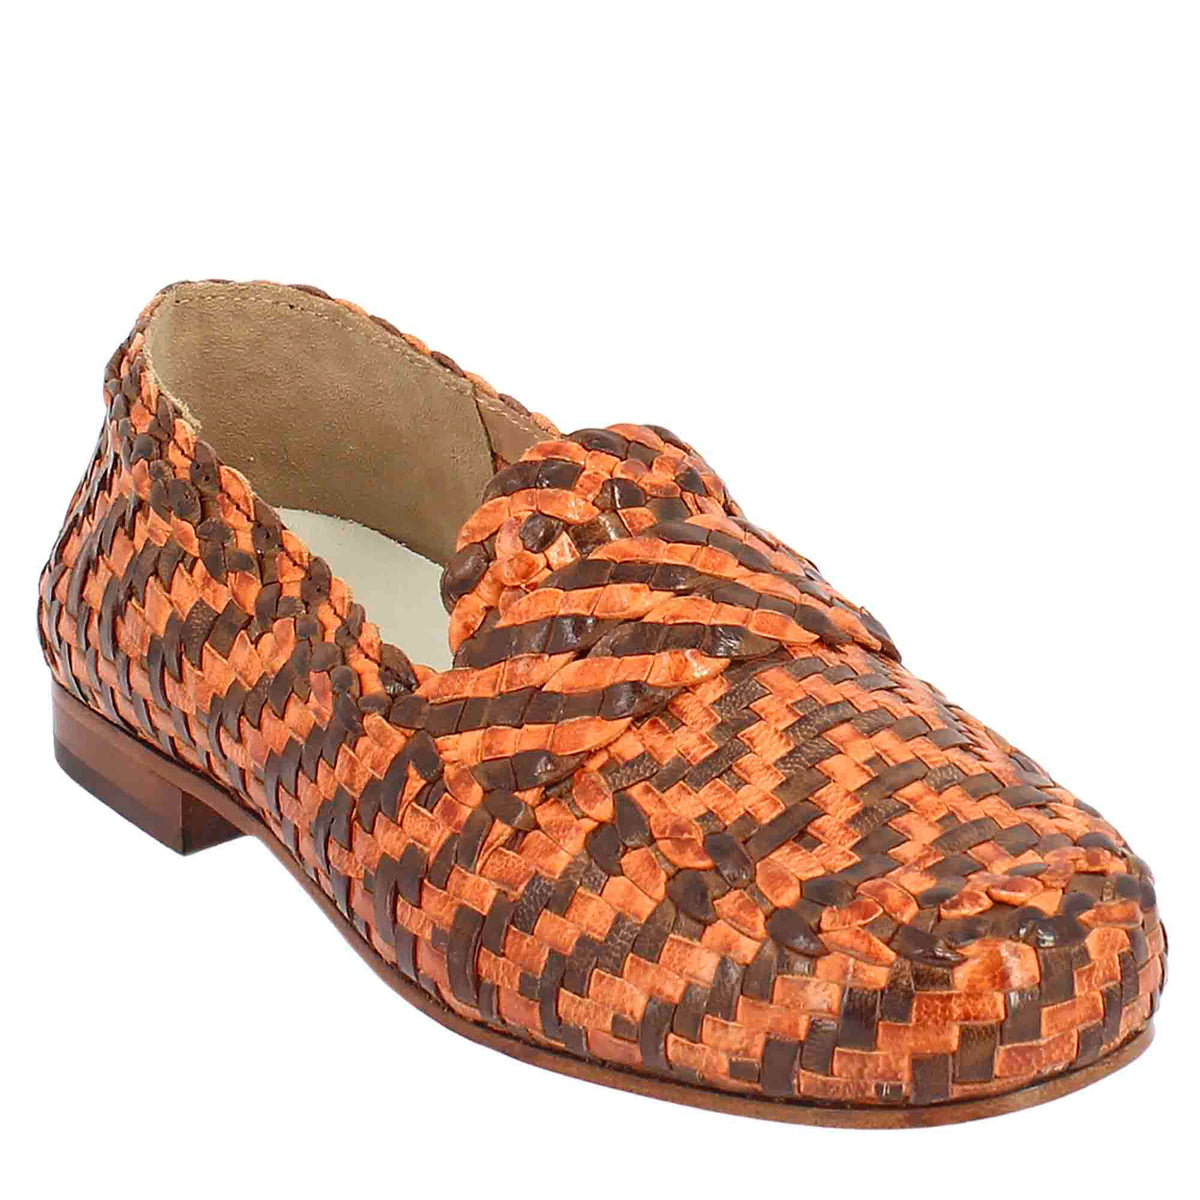 Women's moccasins in brown and orange woven leather